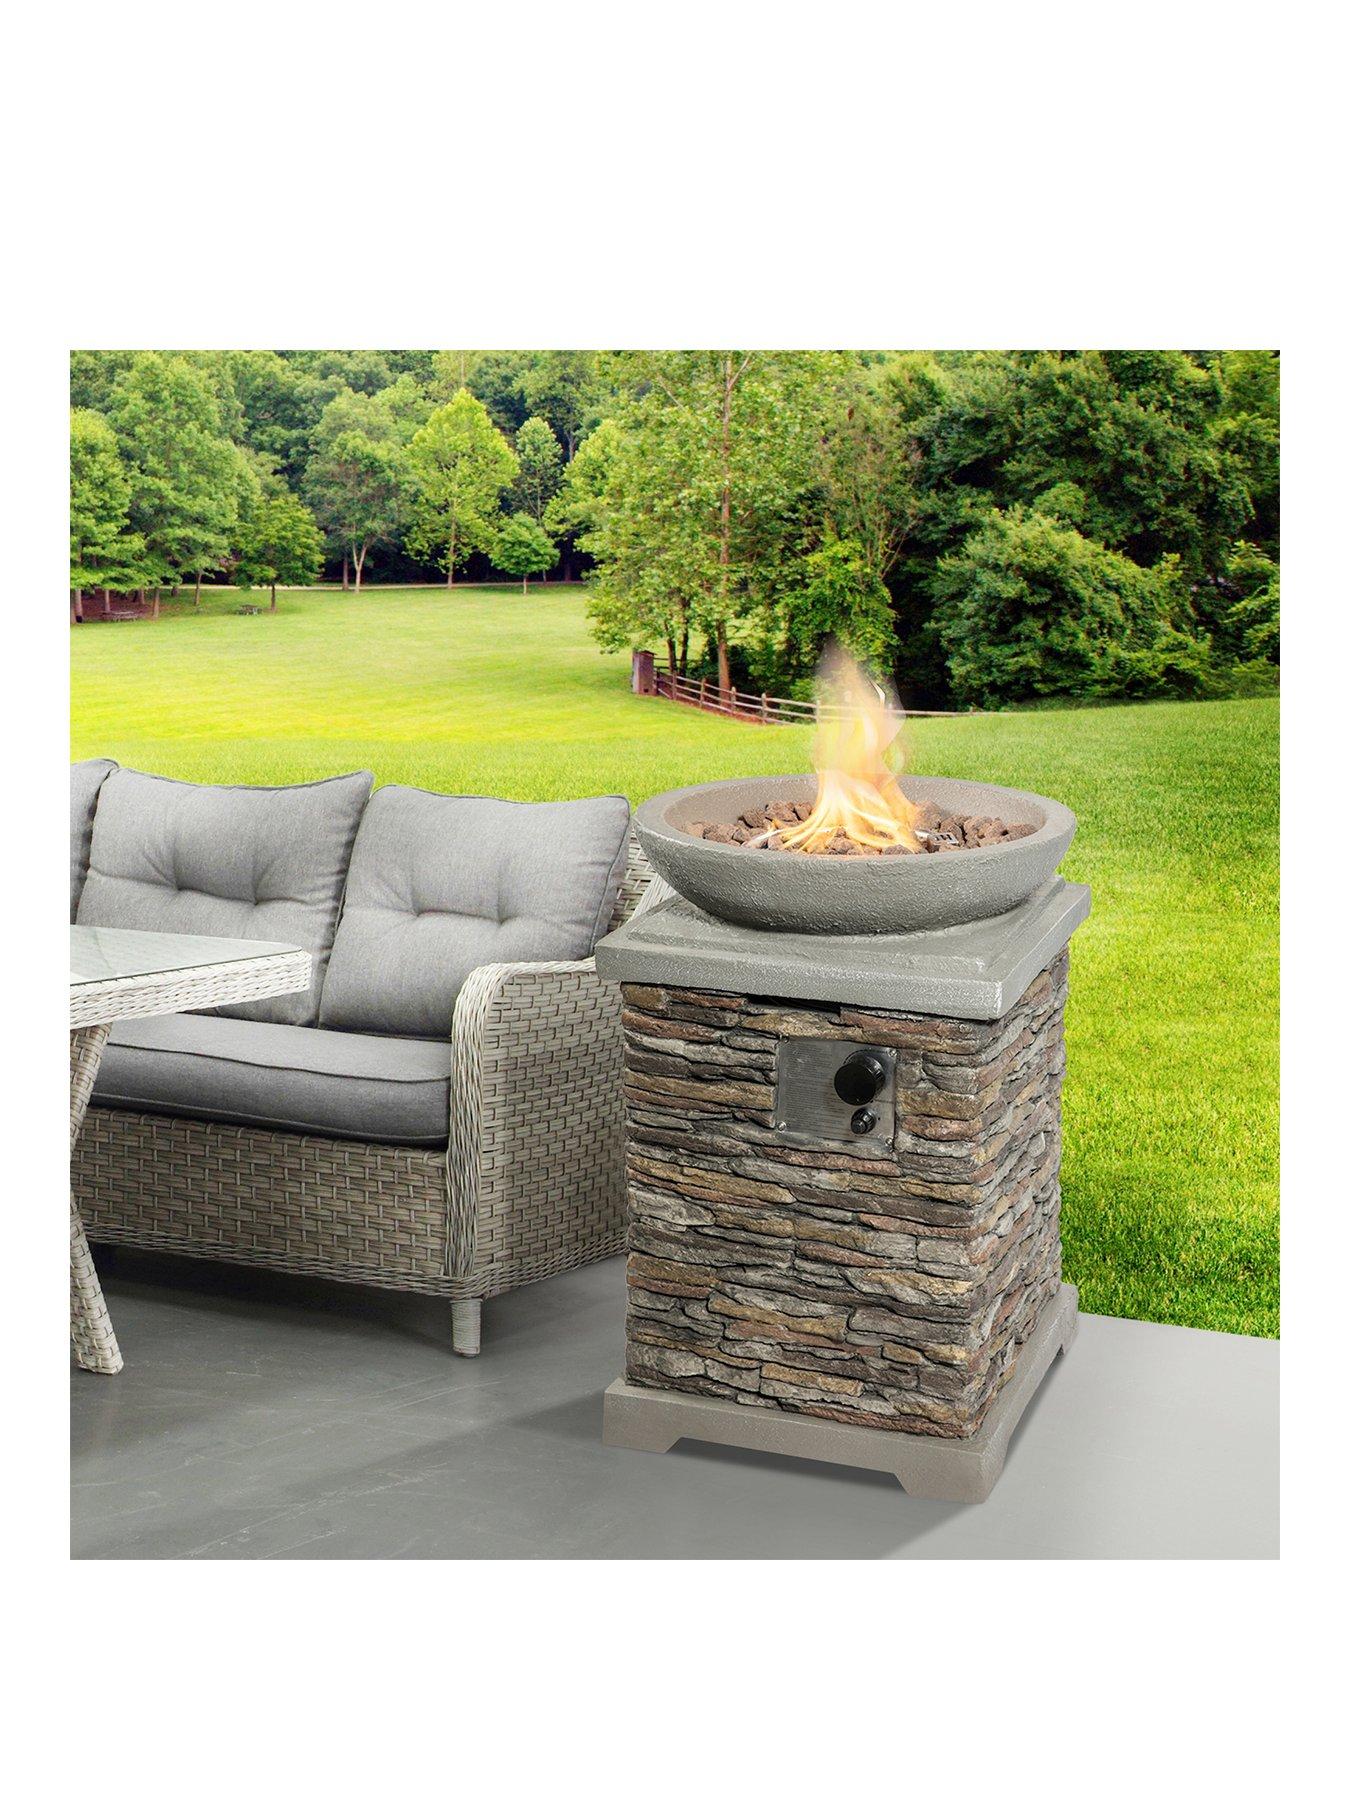 Teamson Home Gas Fire Pit Stone With Lava Rock